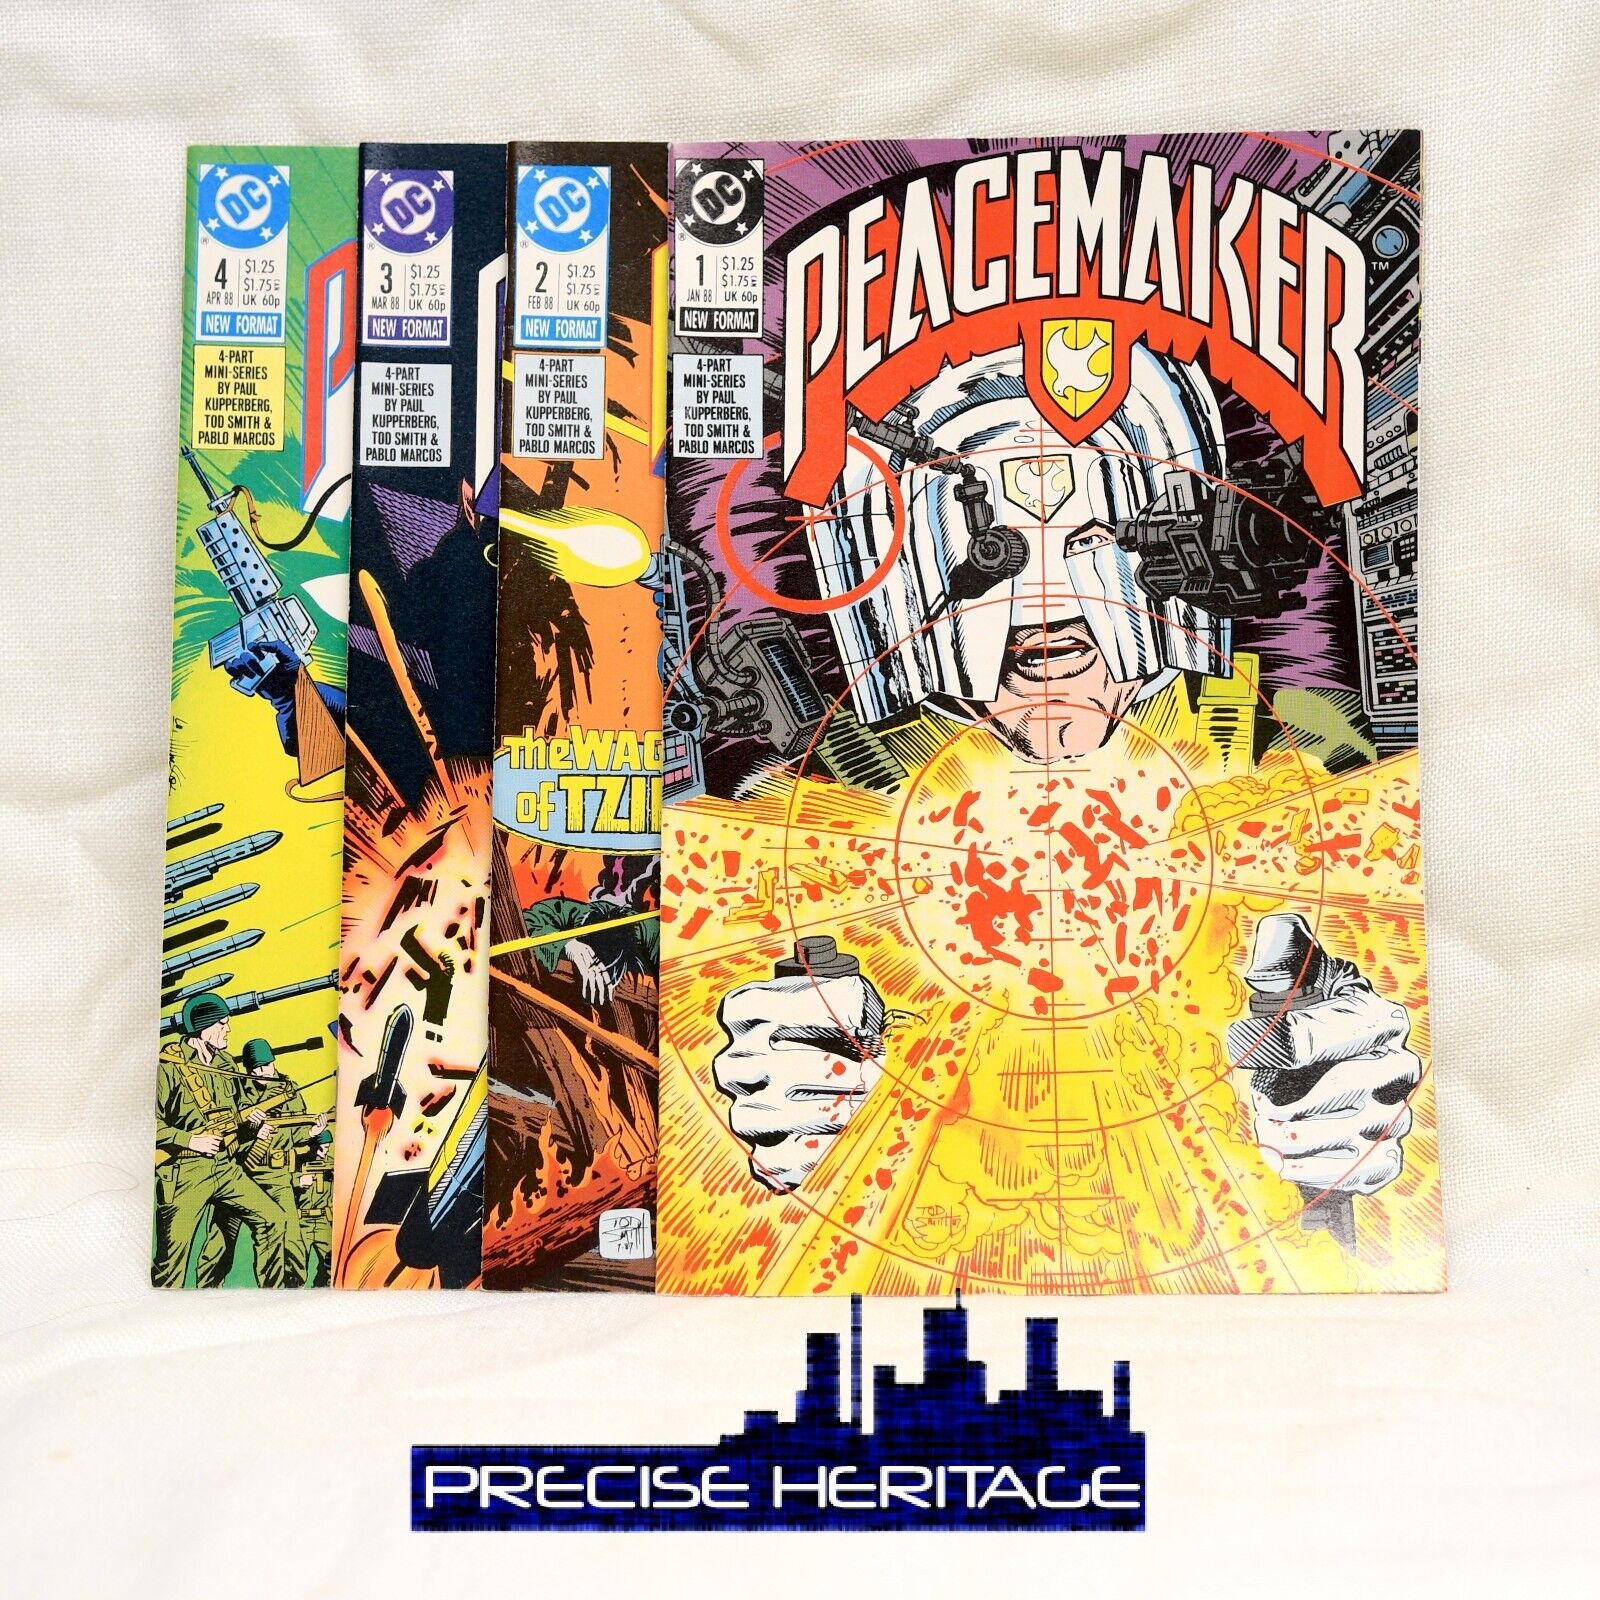 Peacemaker 1-4 1988 Complete Set DC Comics all very VF/NM- or better white pages